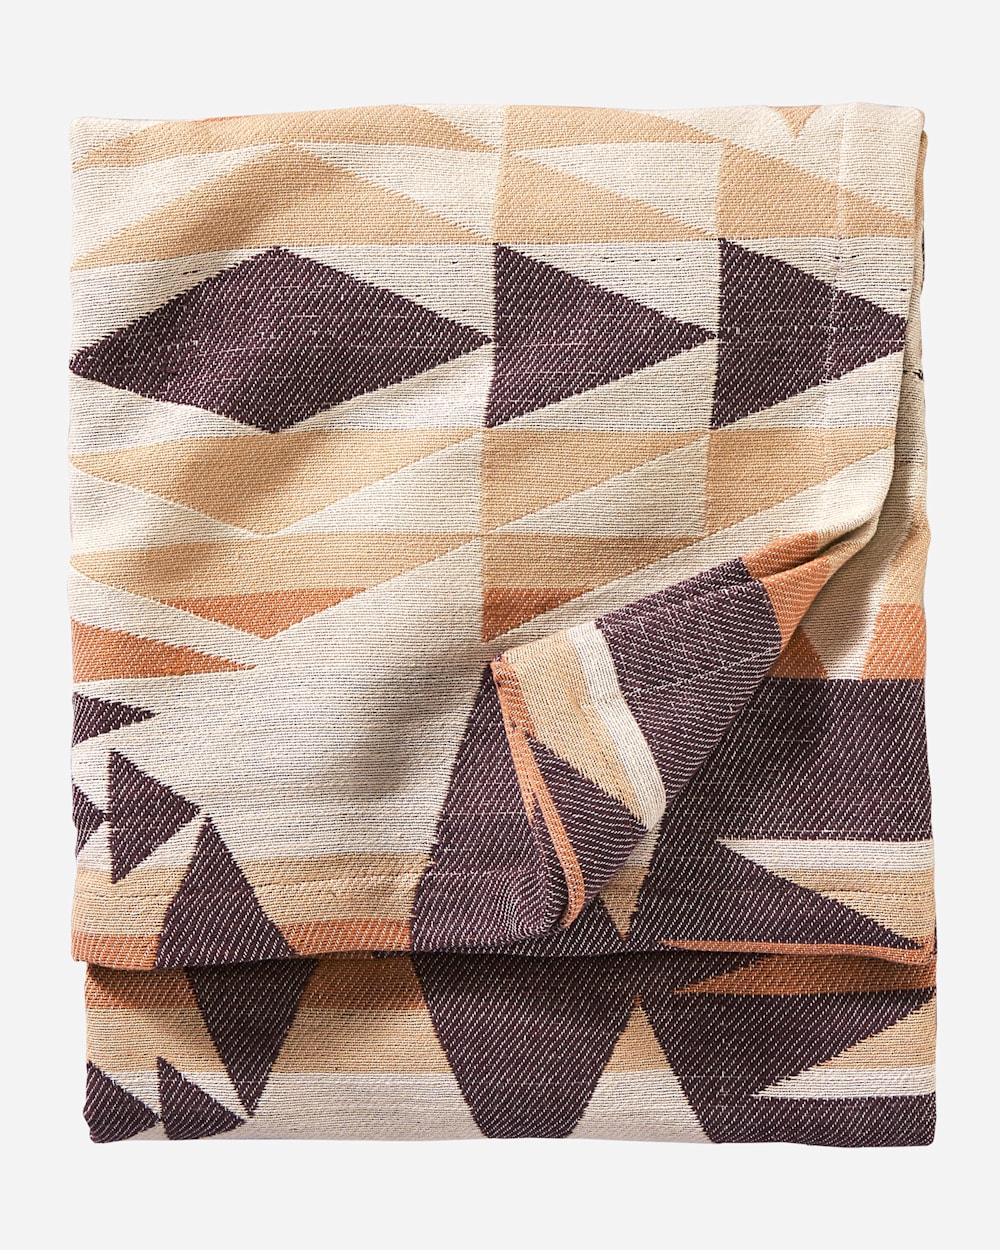 ALTERNATE VIEW OF CRESCENT BUTTE WOVEN THROW IN TAN MULTI image number 2